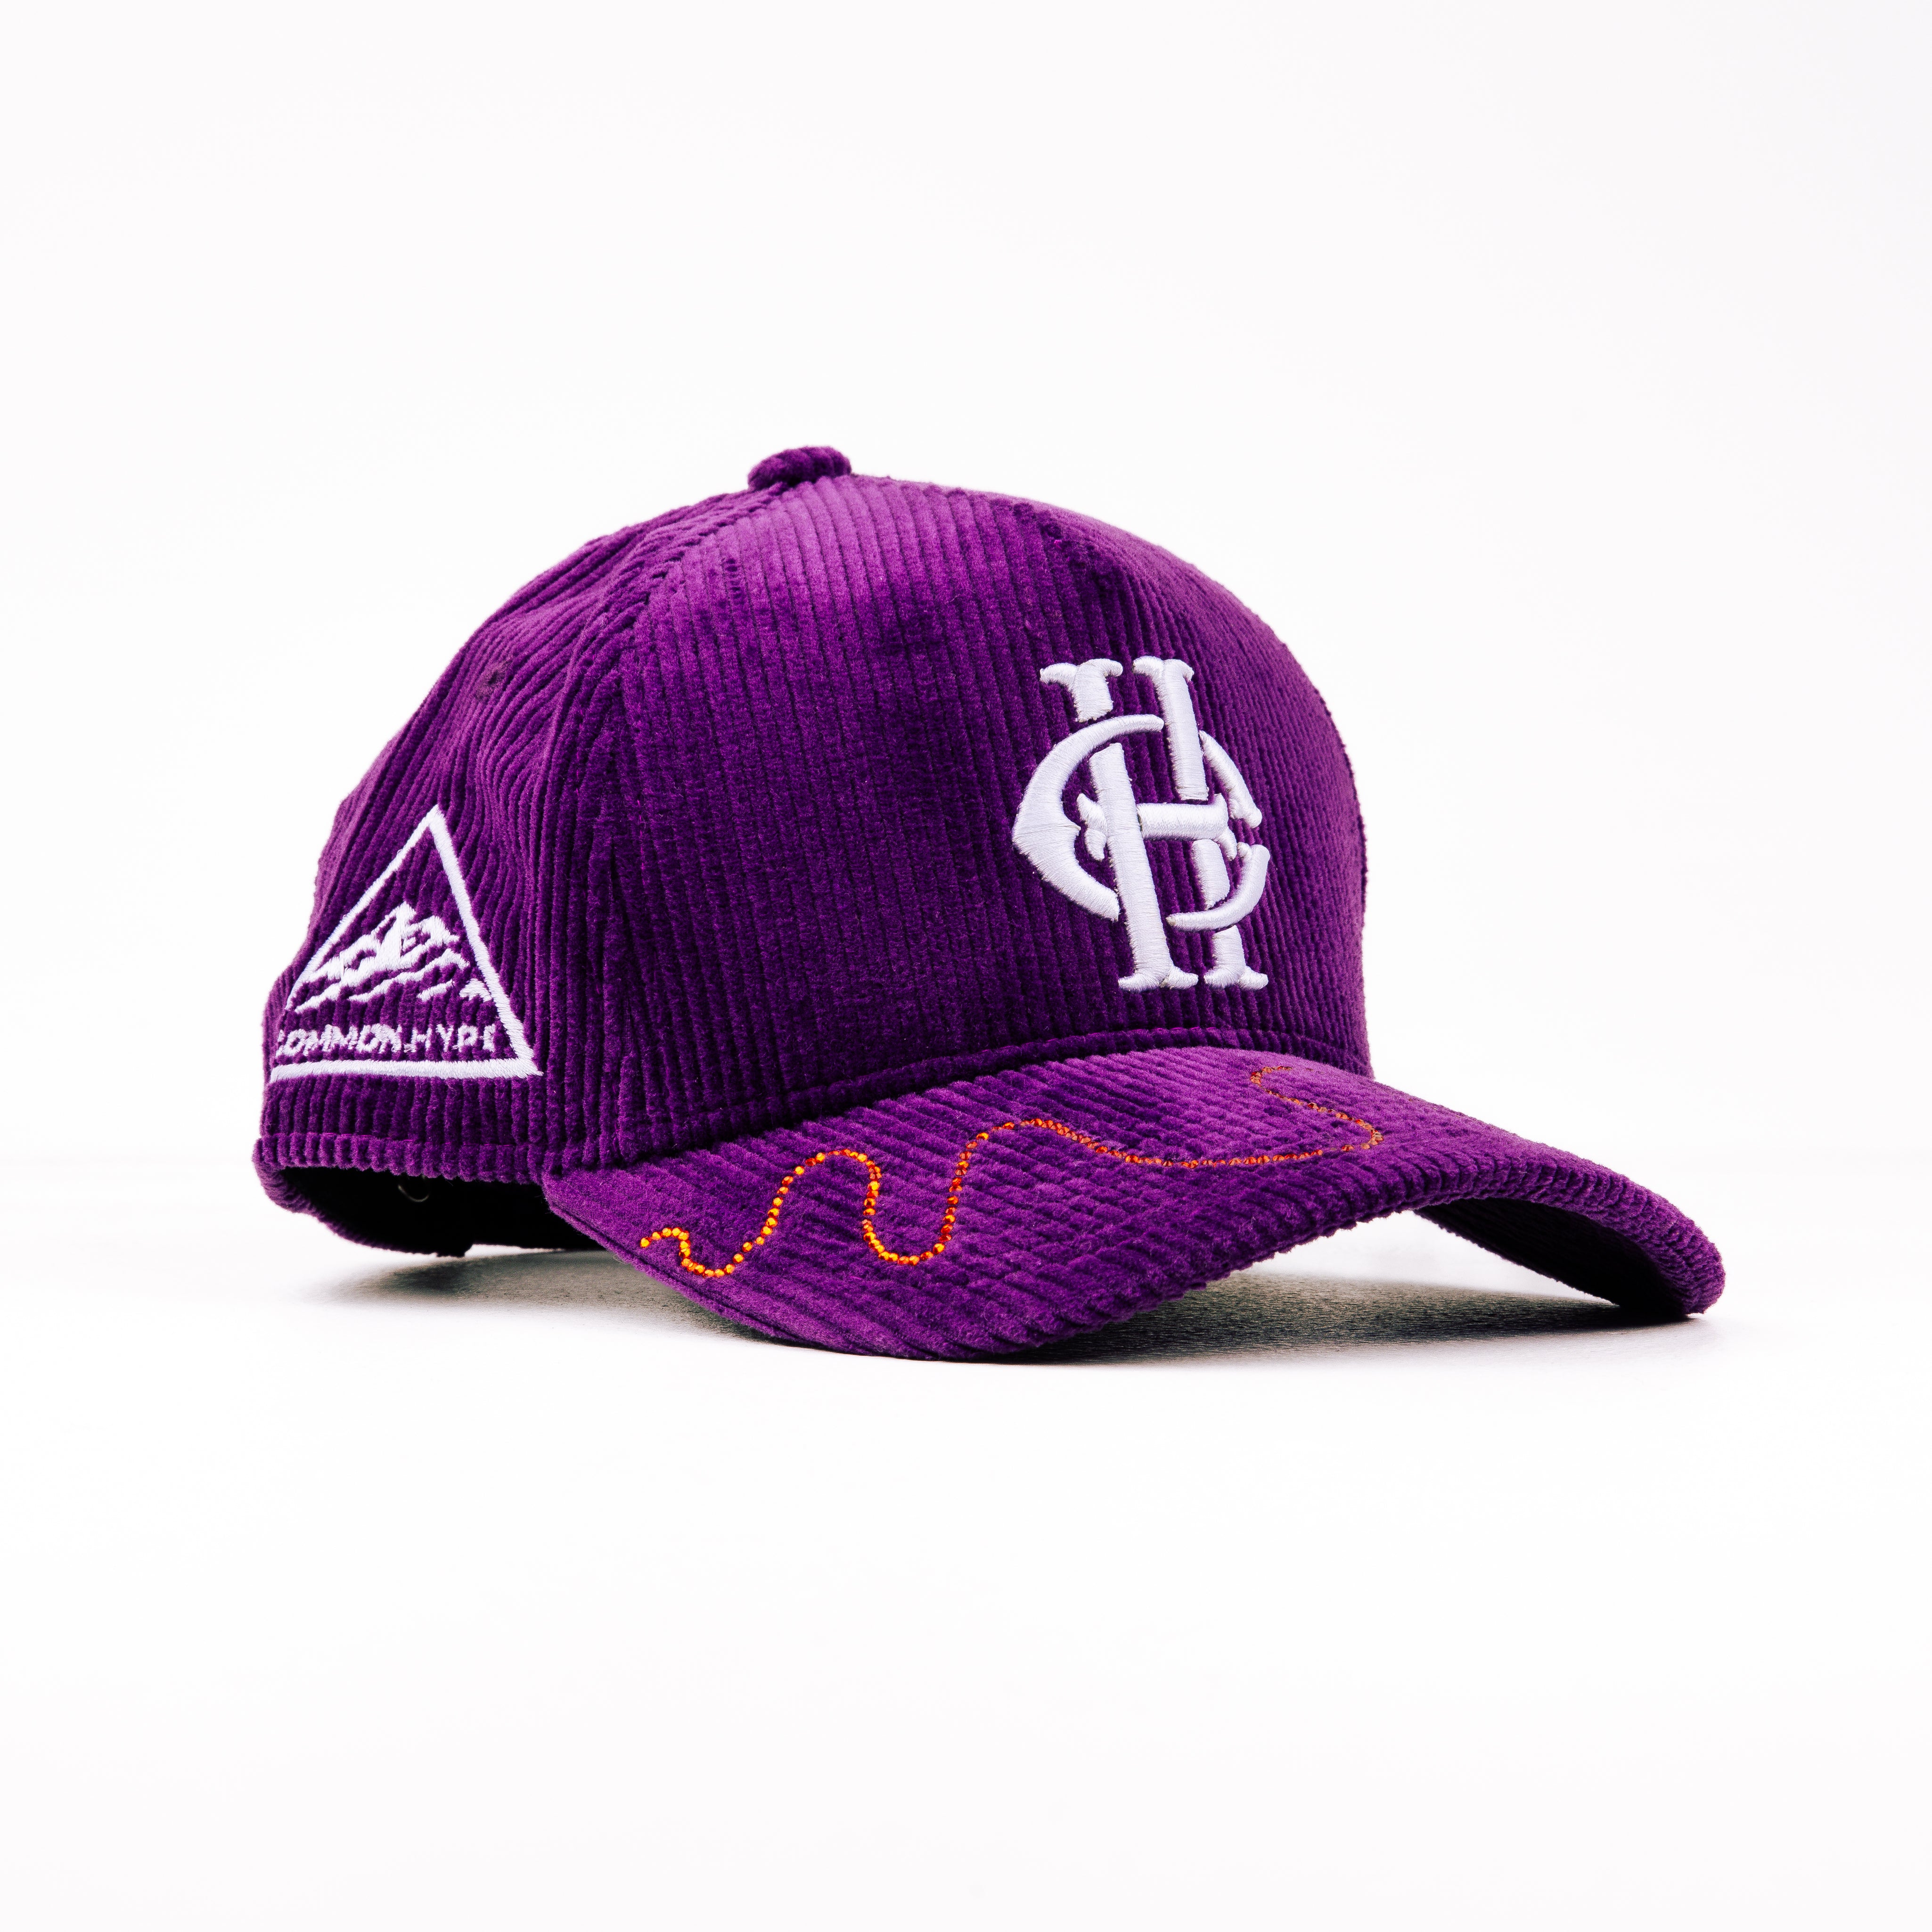 Common Hype “Crystal’d” Corduroy Hat (1 of 1) - H8